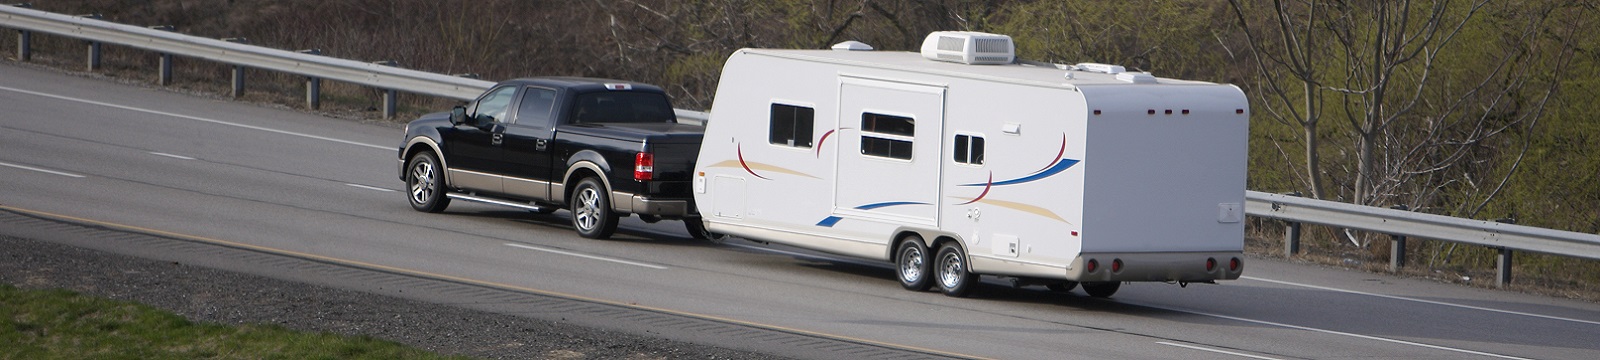 Pickup truck towing a camper